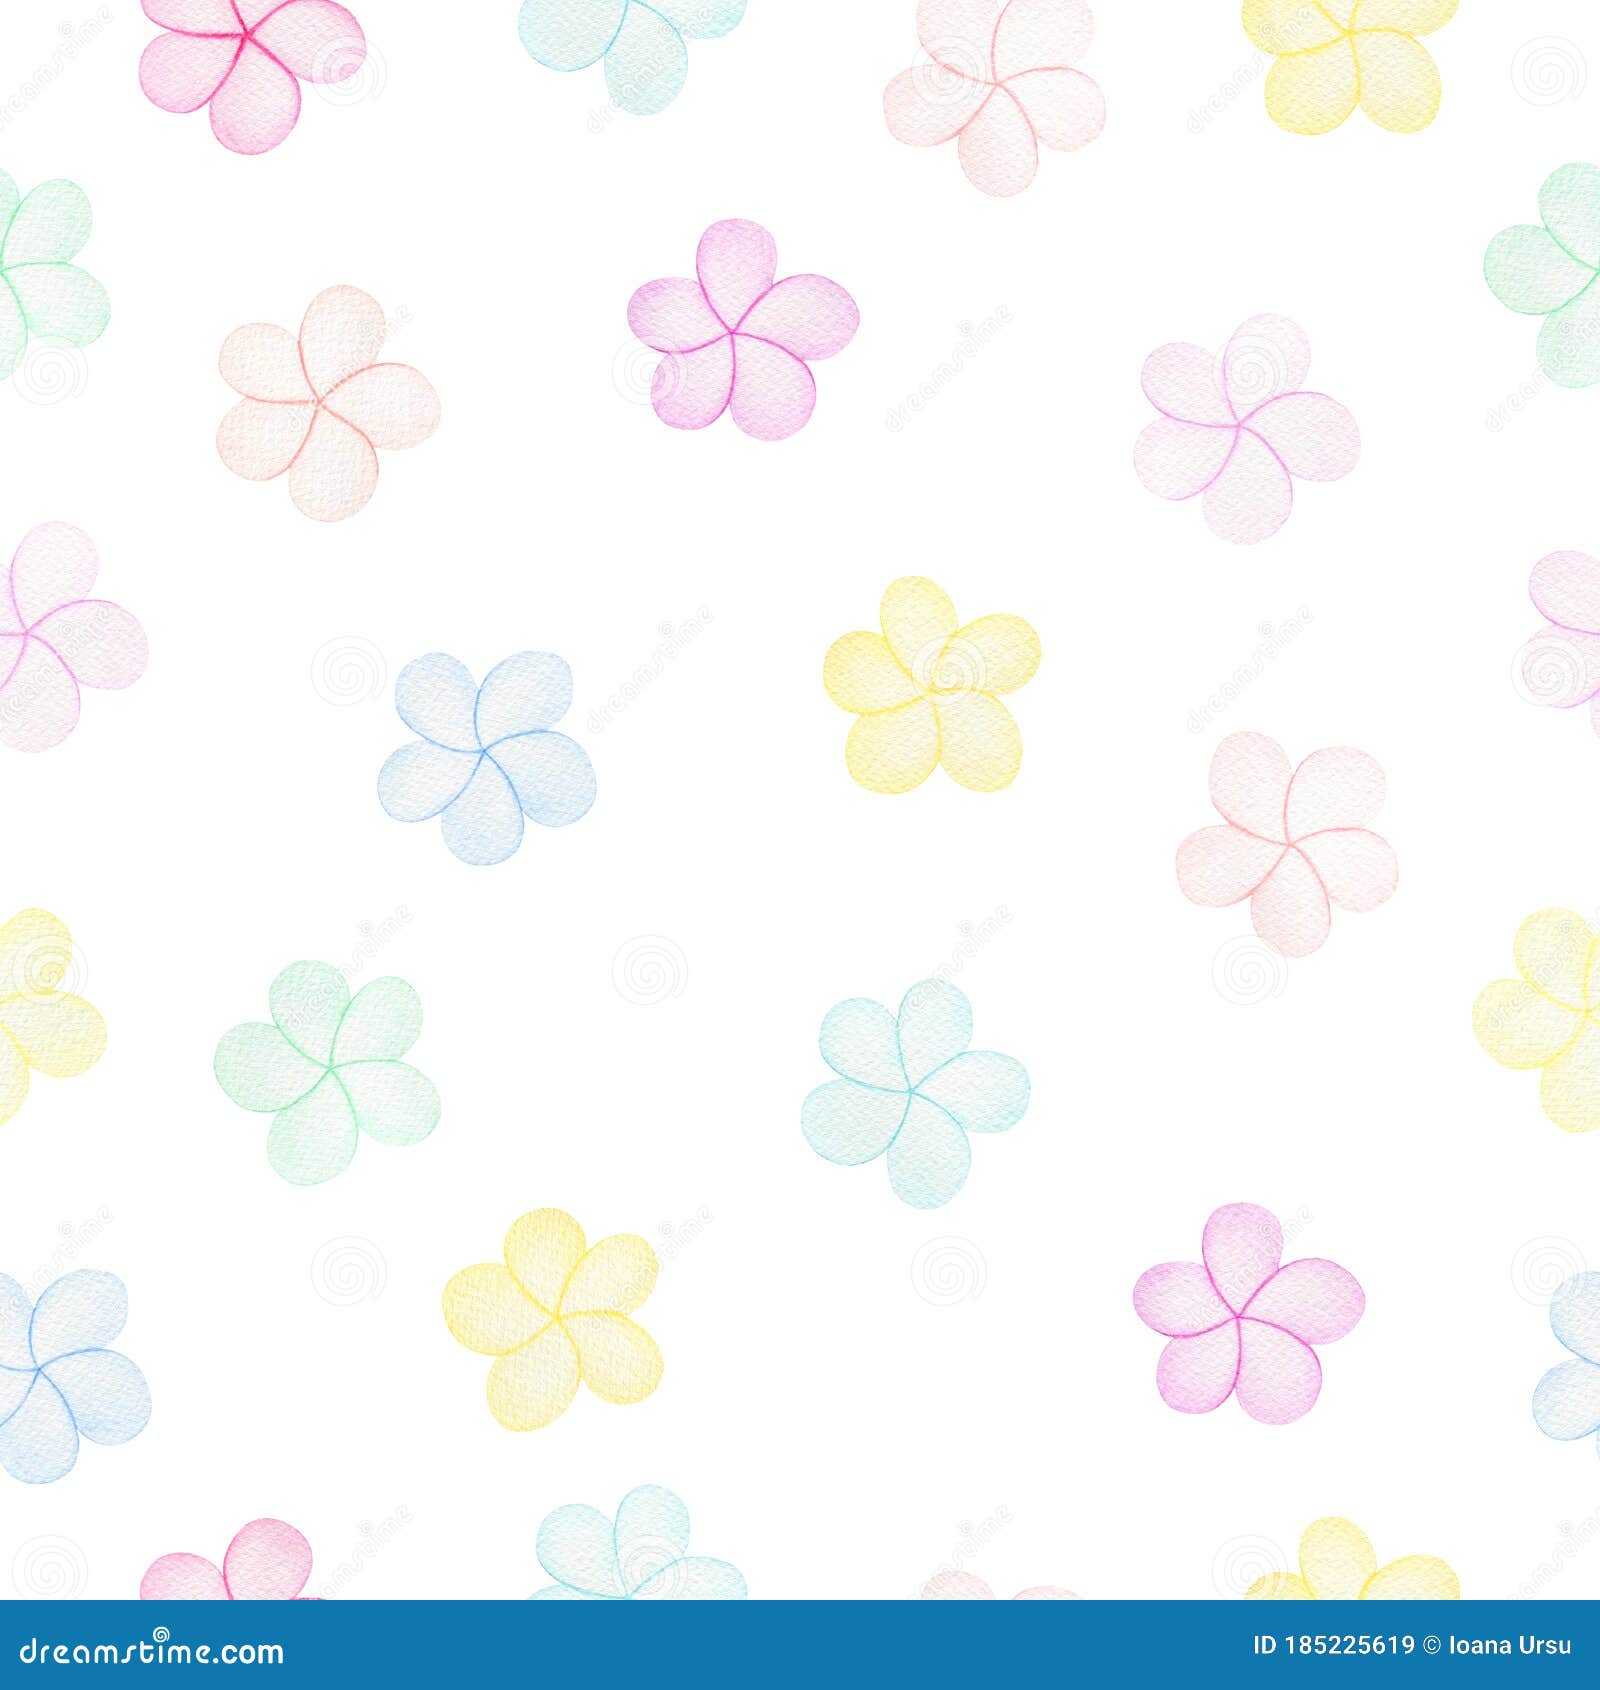 Seamless Pattern with Pastel Colored Flowers, Cute and Simple Watercolor  Illustration for Party Backgrounds, Wrapping or Fabric Stock Illustration -  Illustration of love, abstract: 185225619